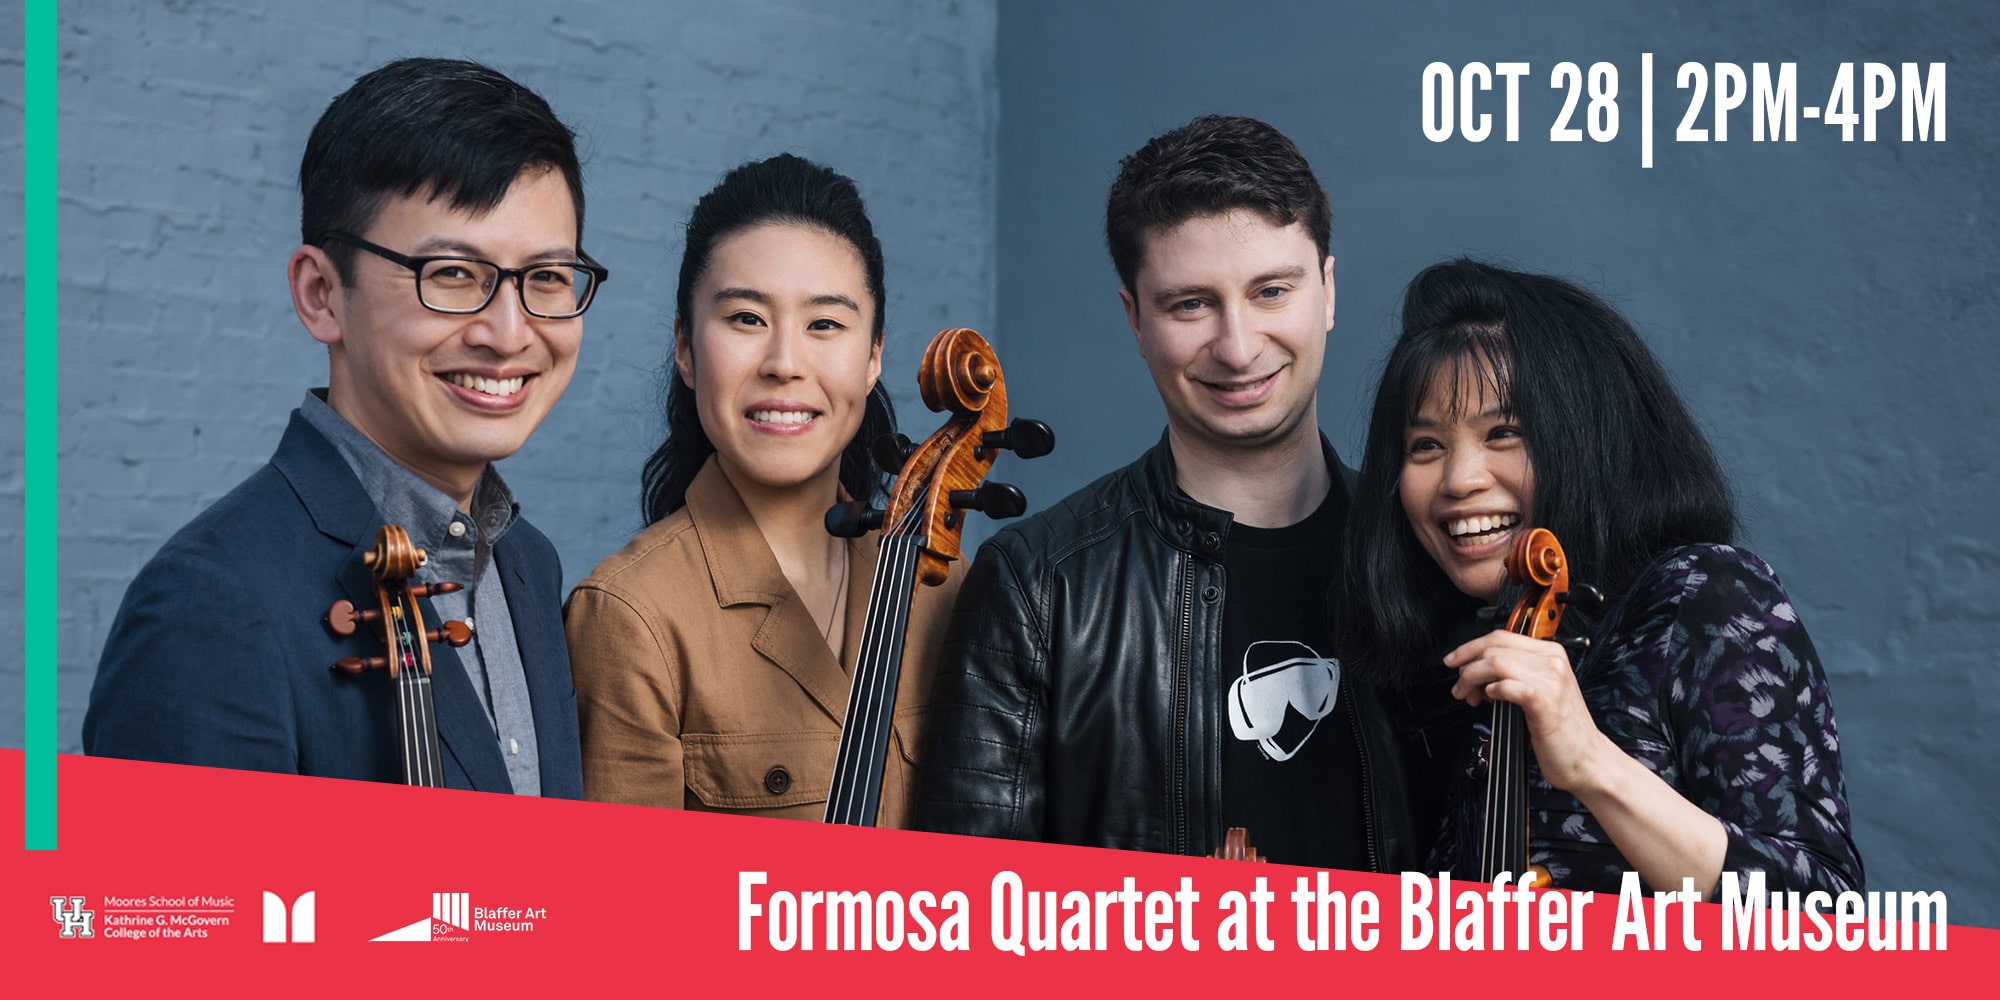 Experience the captivating Formosa Quartet at the Blaffer Art Museum